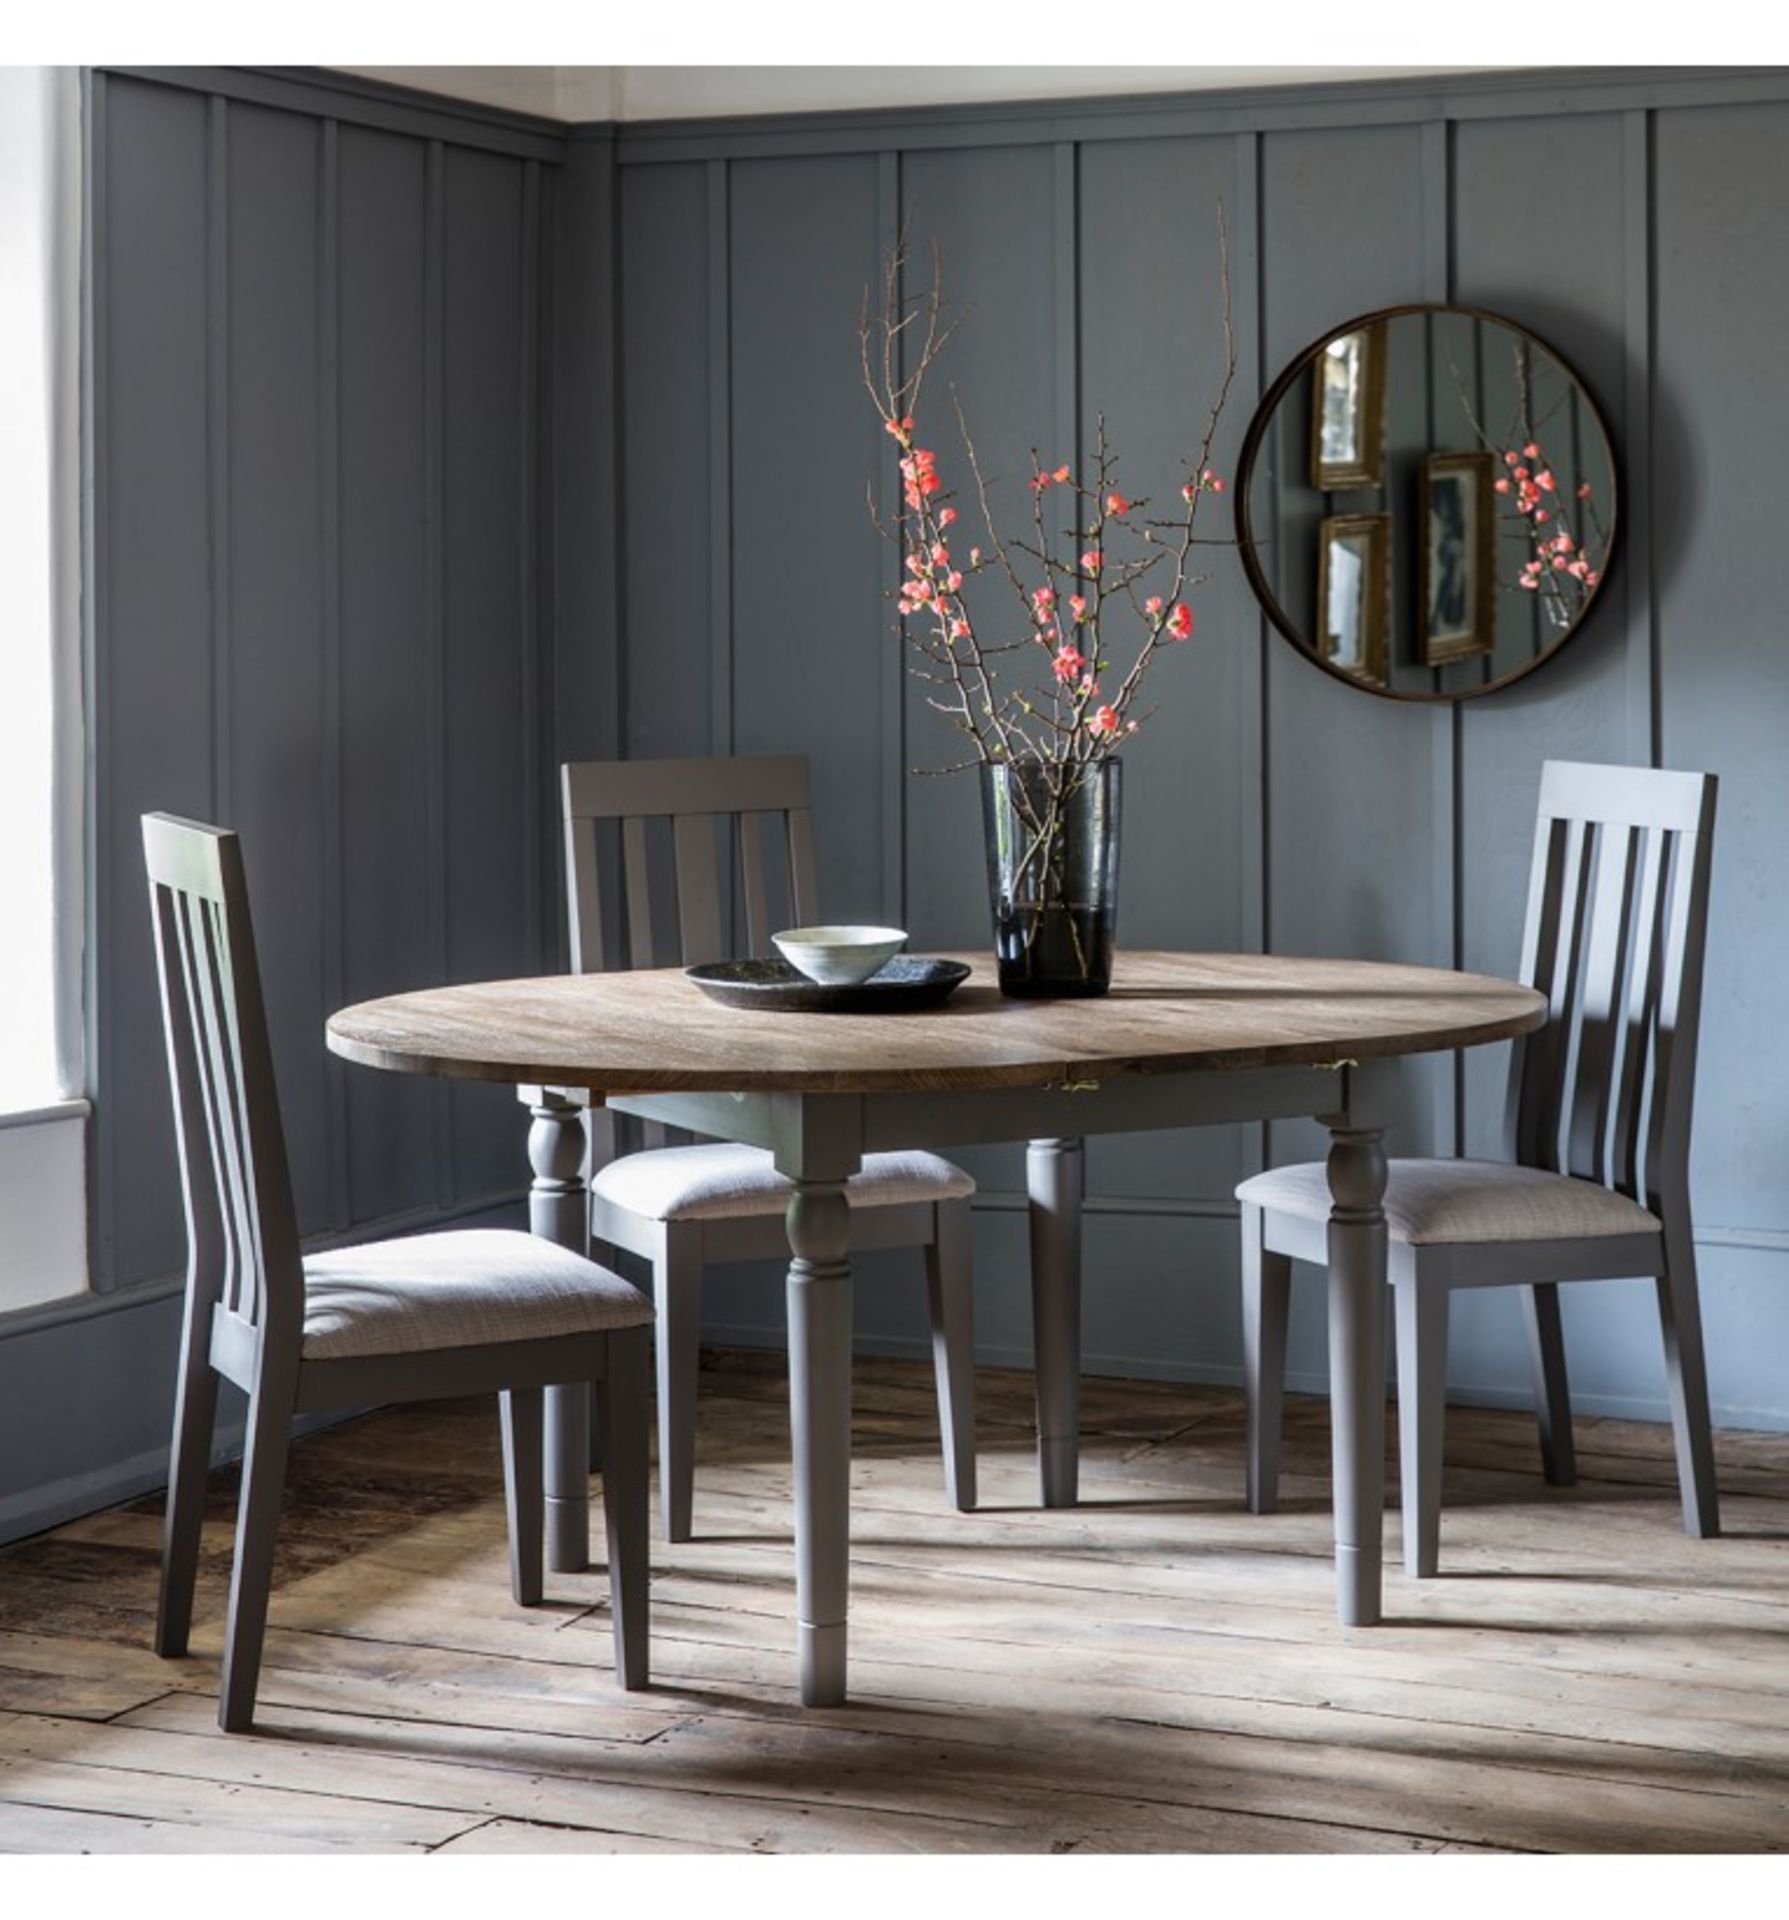 Farmhouse Dining Table - Image 4 of 4